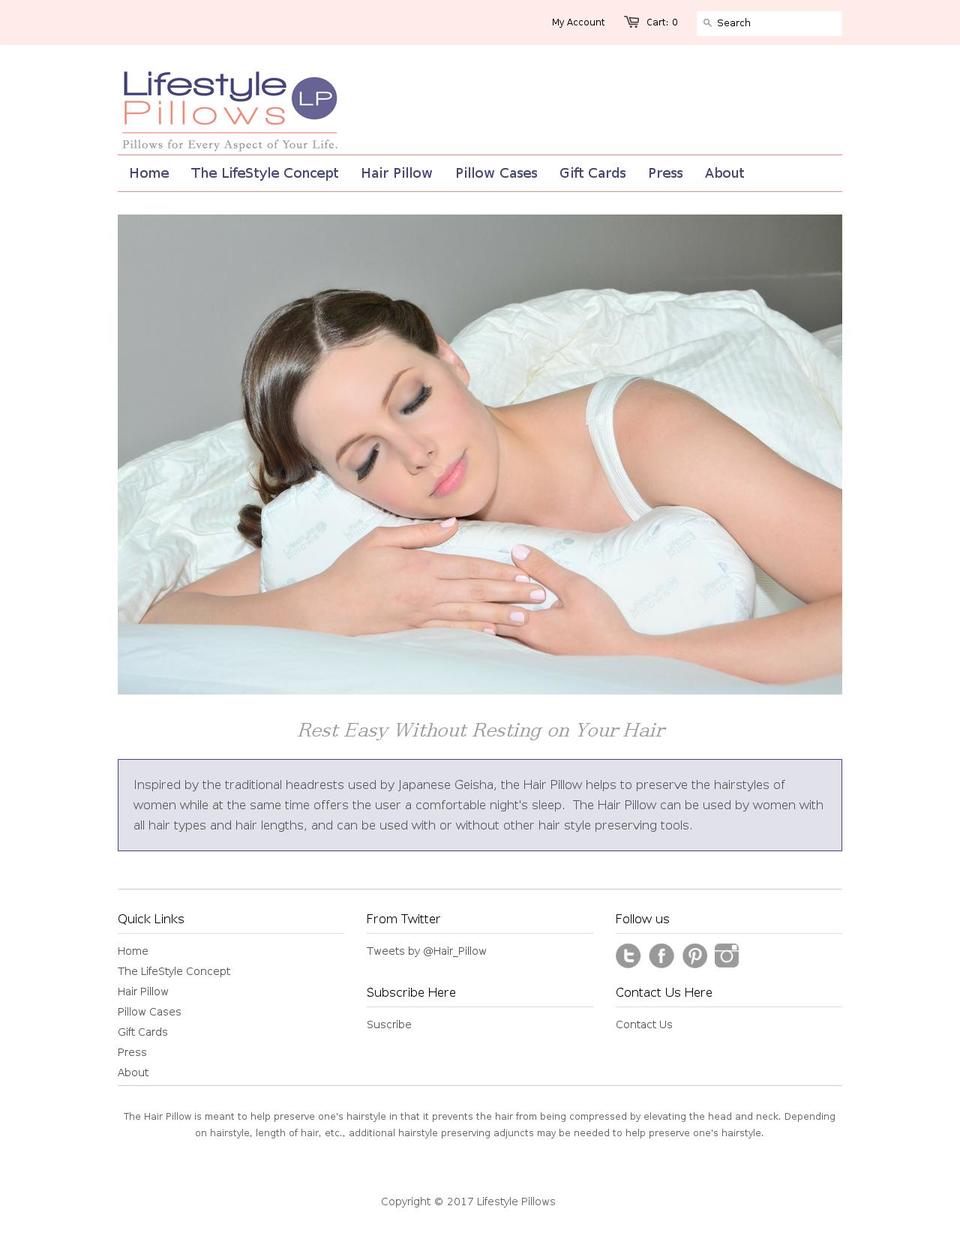 Startup Shopify theme site example lifestylepillows.com